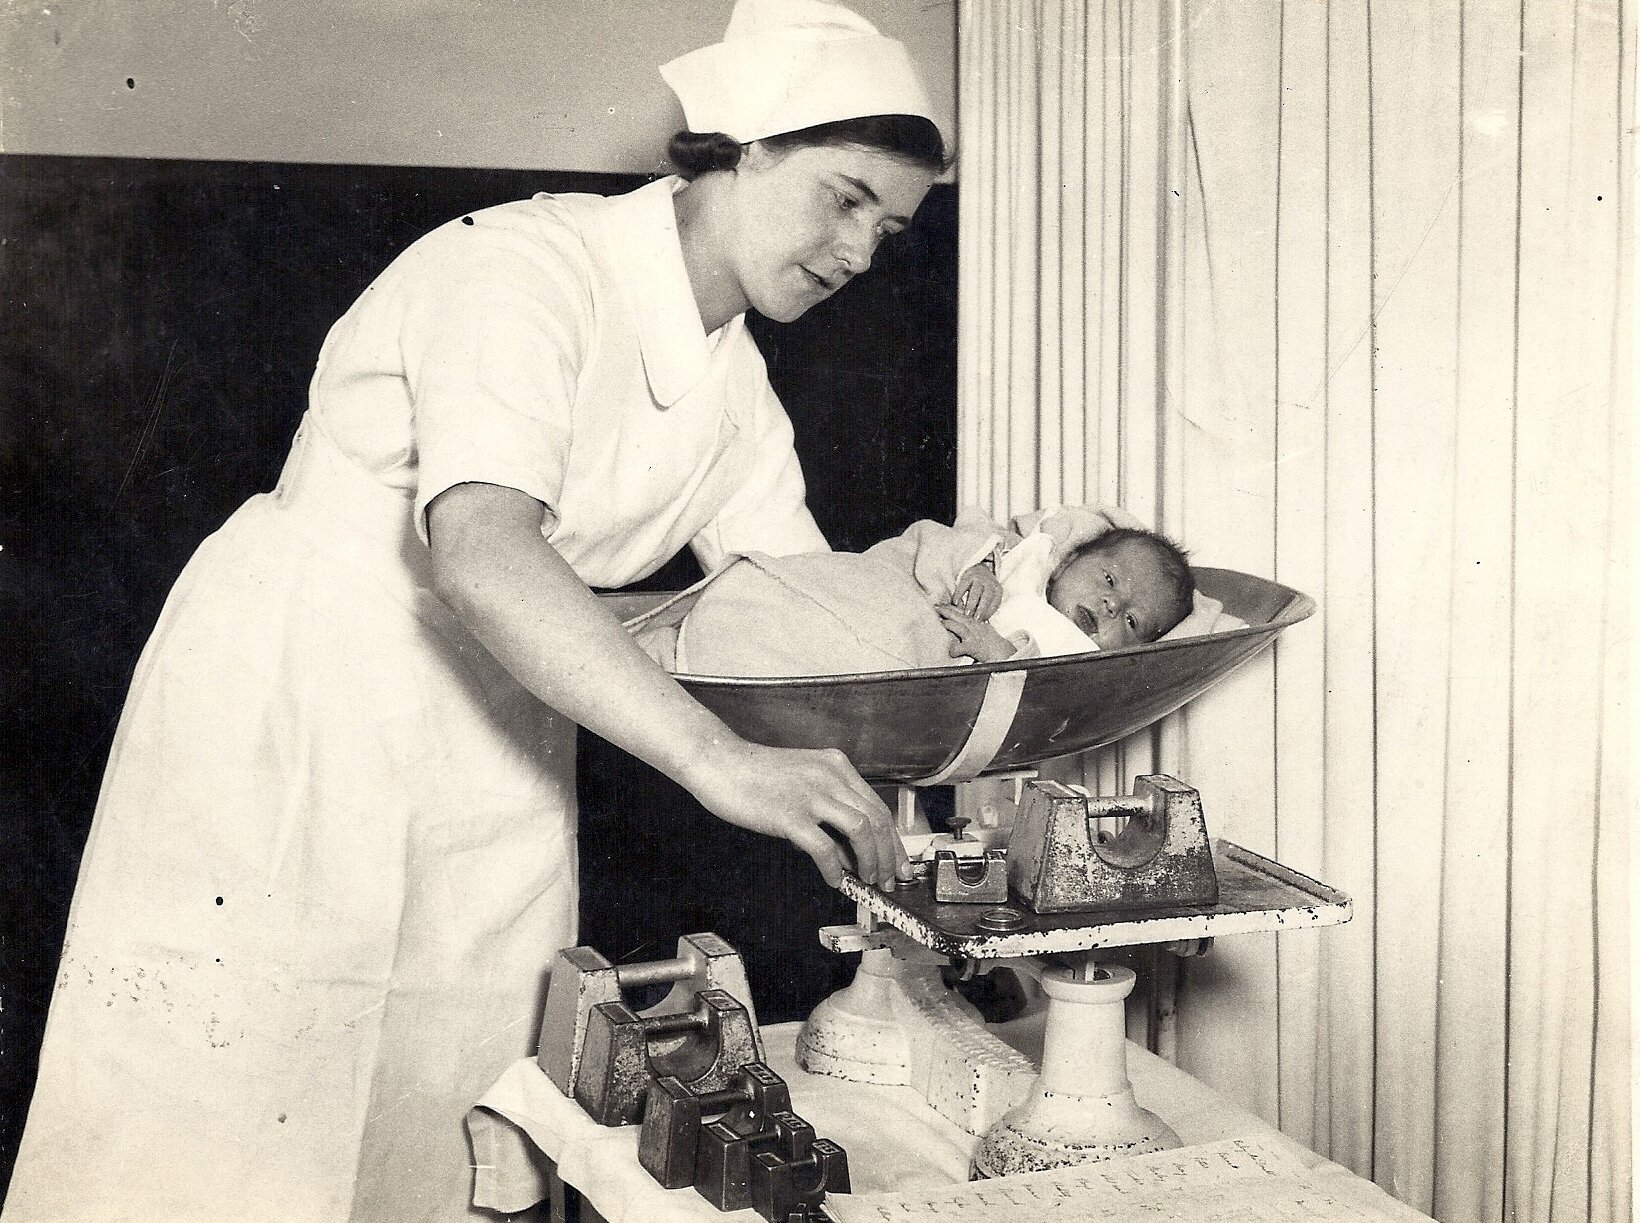 Midwife Lucy Ford at the Worcester Royal Infirmary c. 1940s